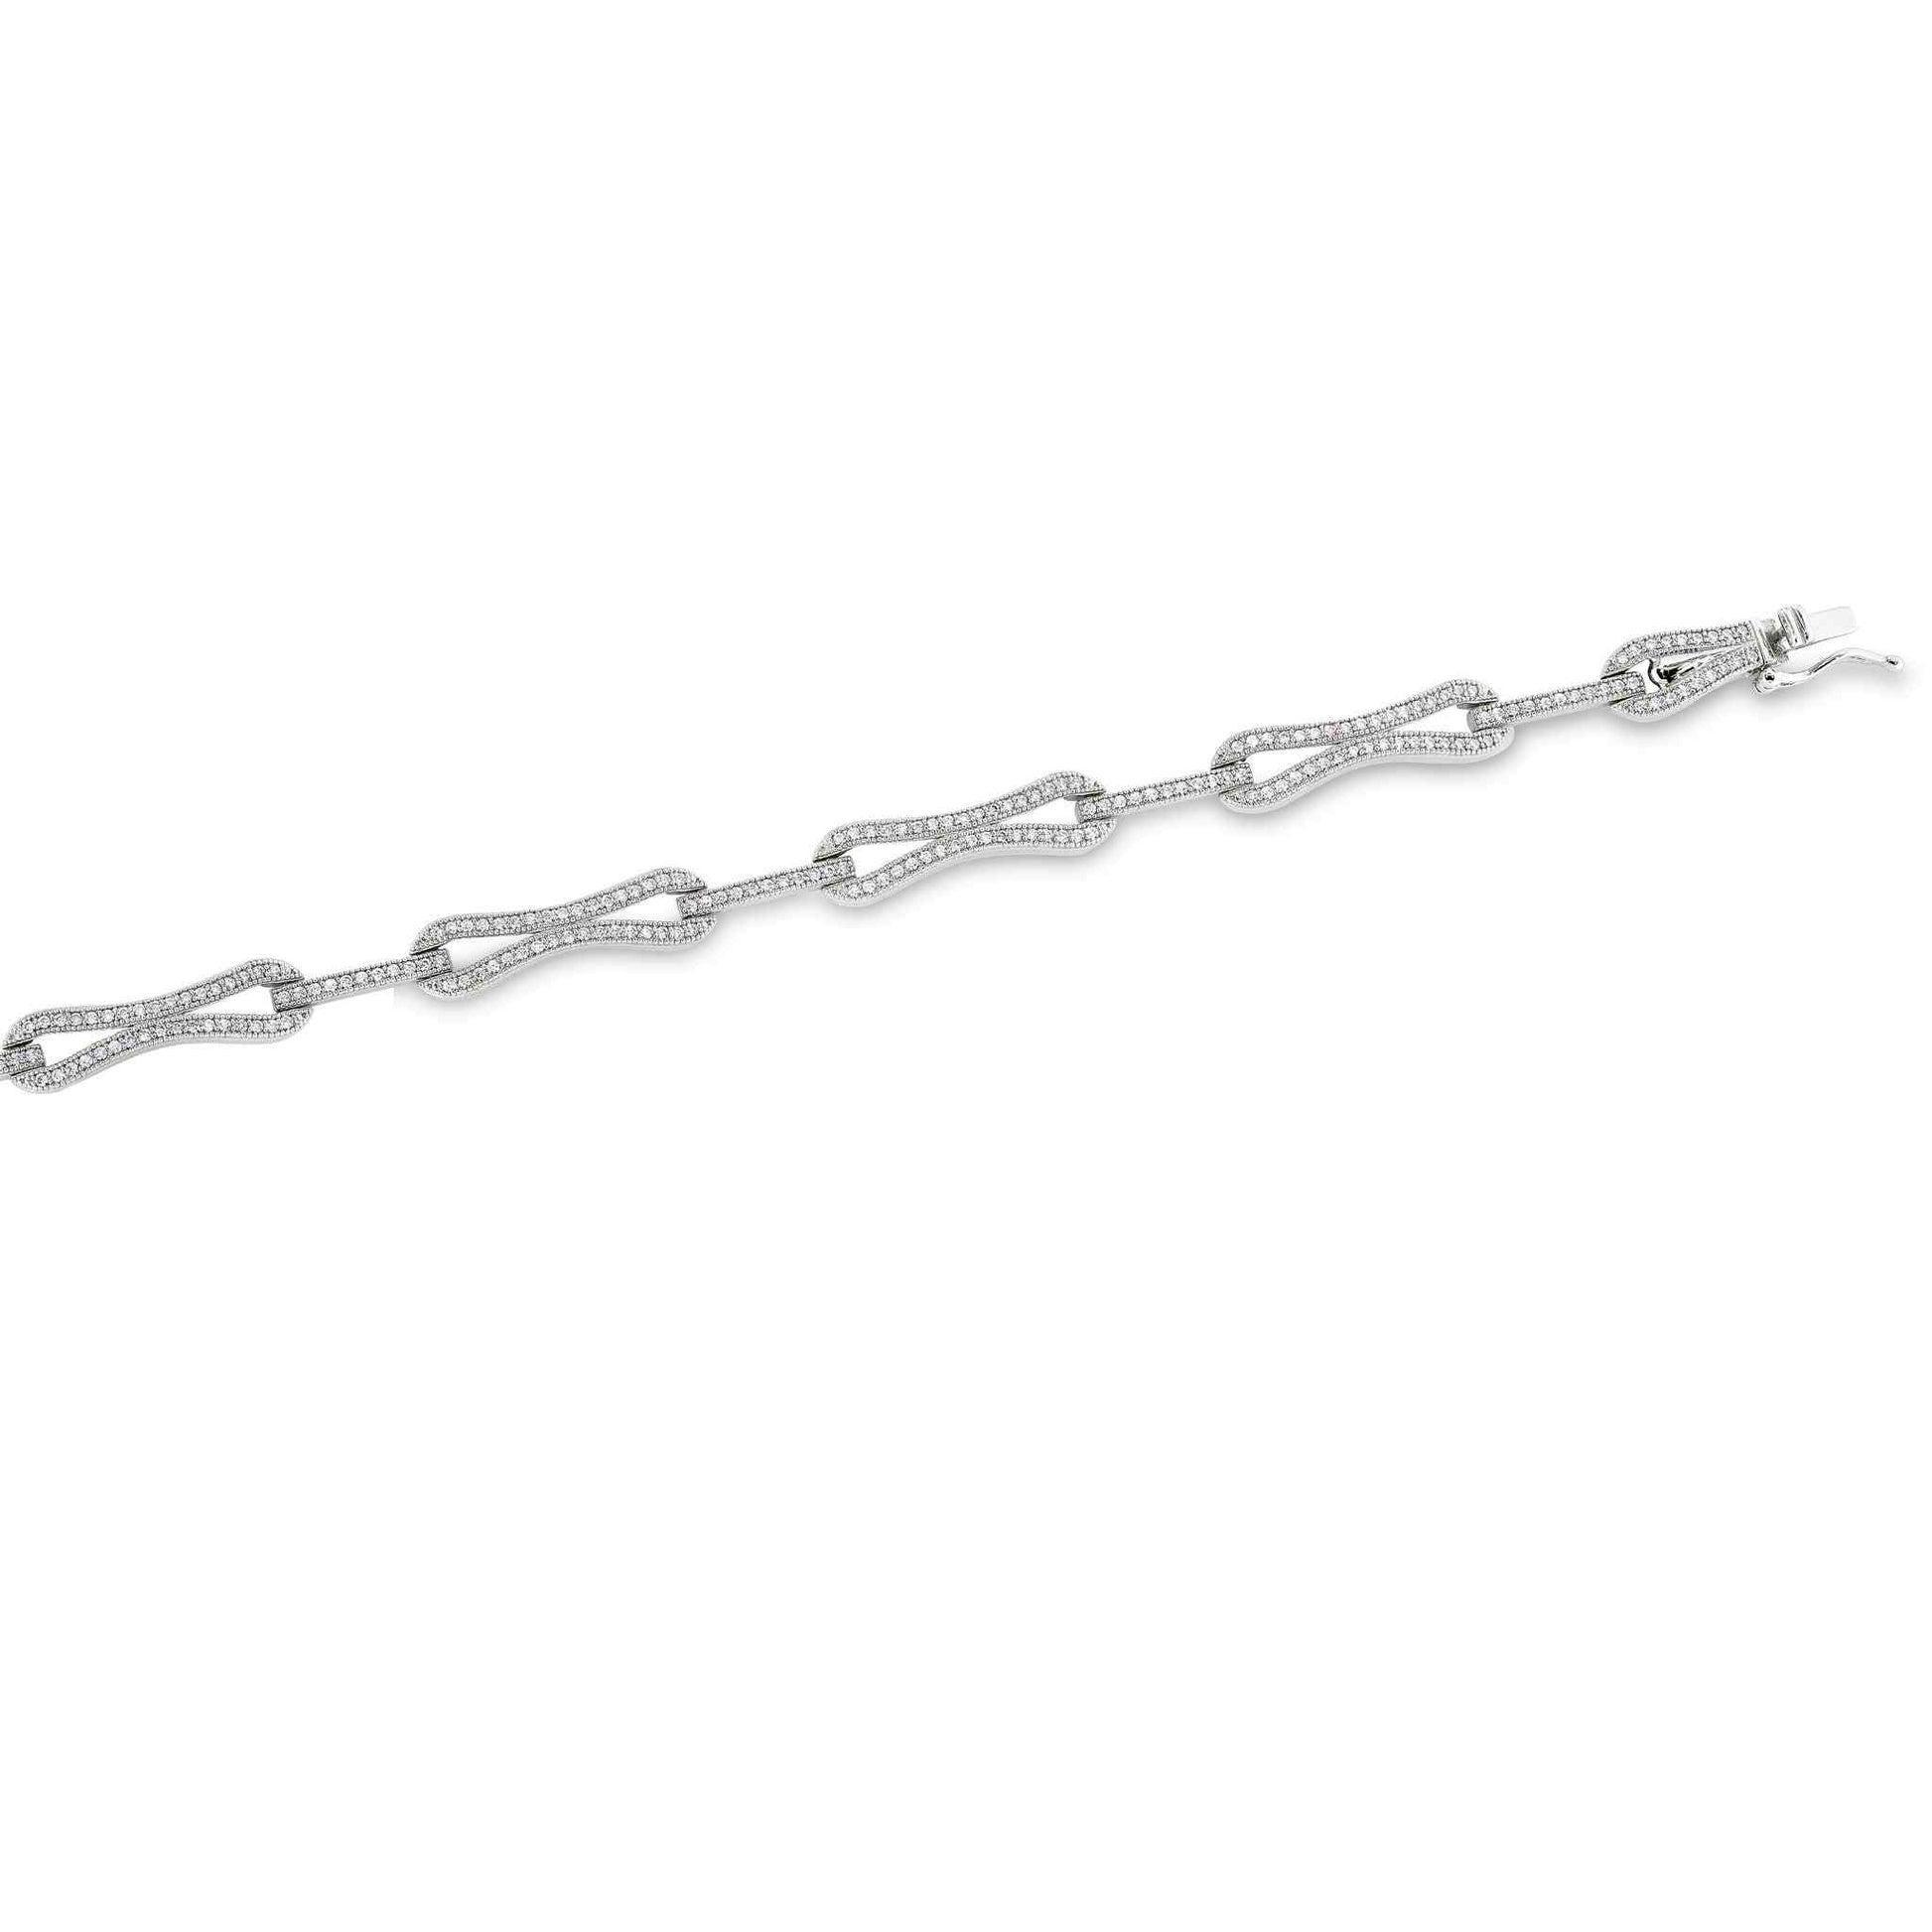 A five linked knots bracelet with simulated diamonds displayed on a neutral white background.